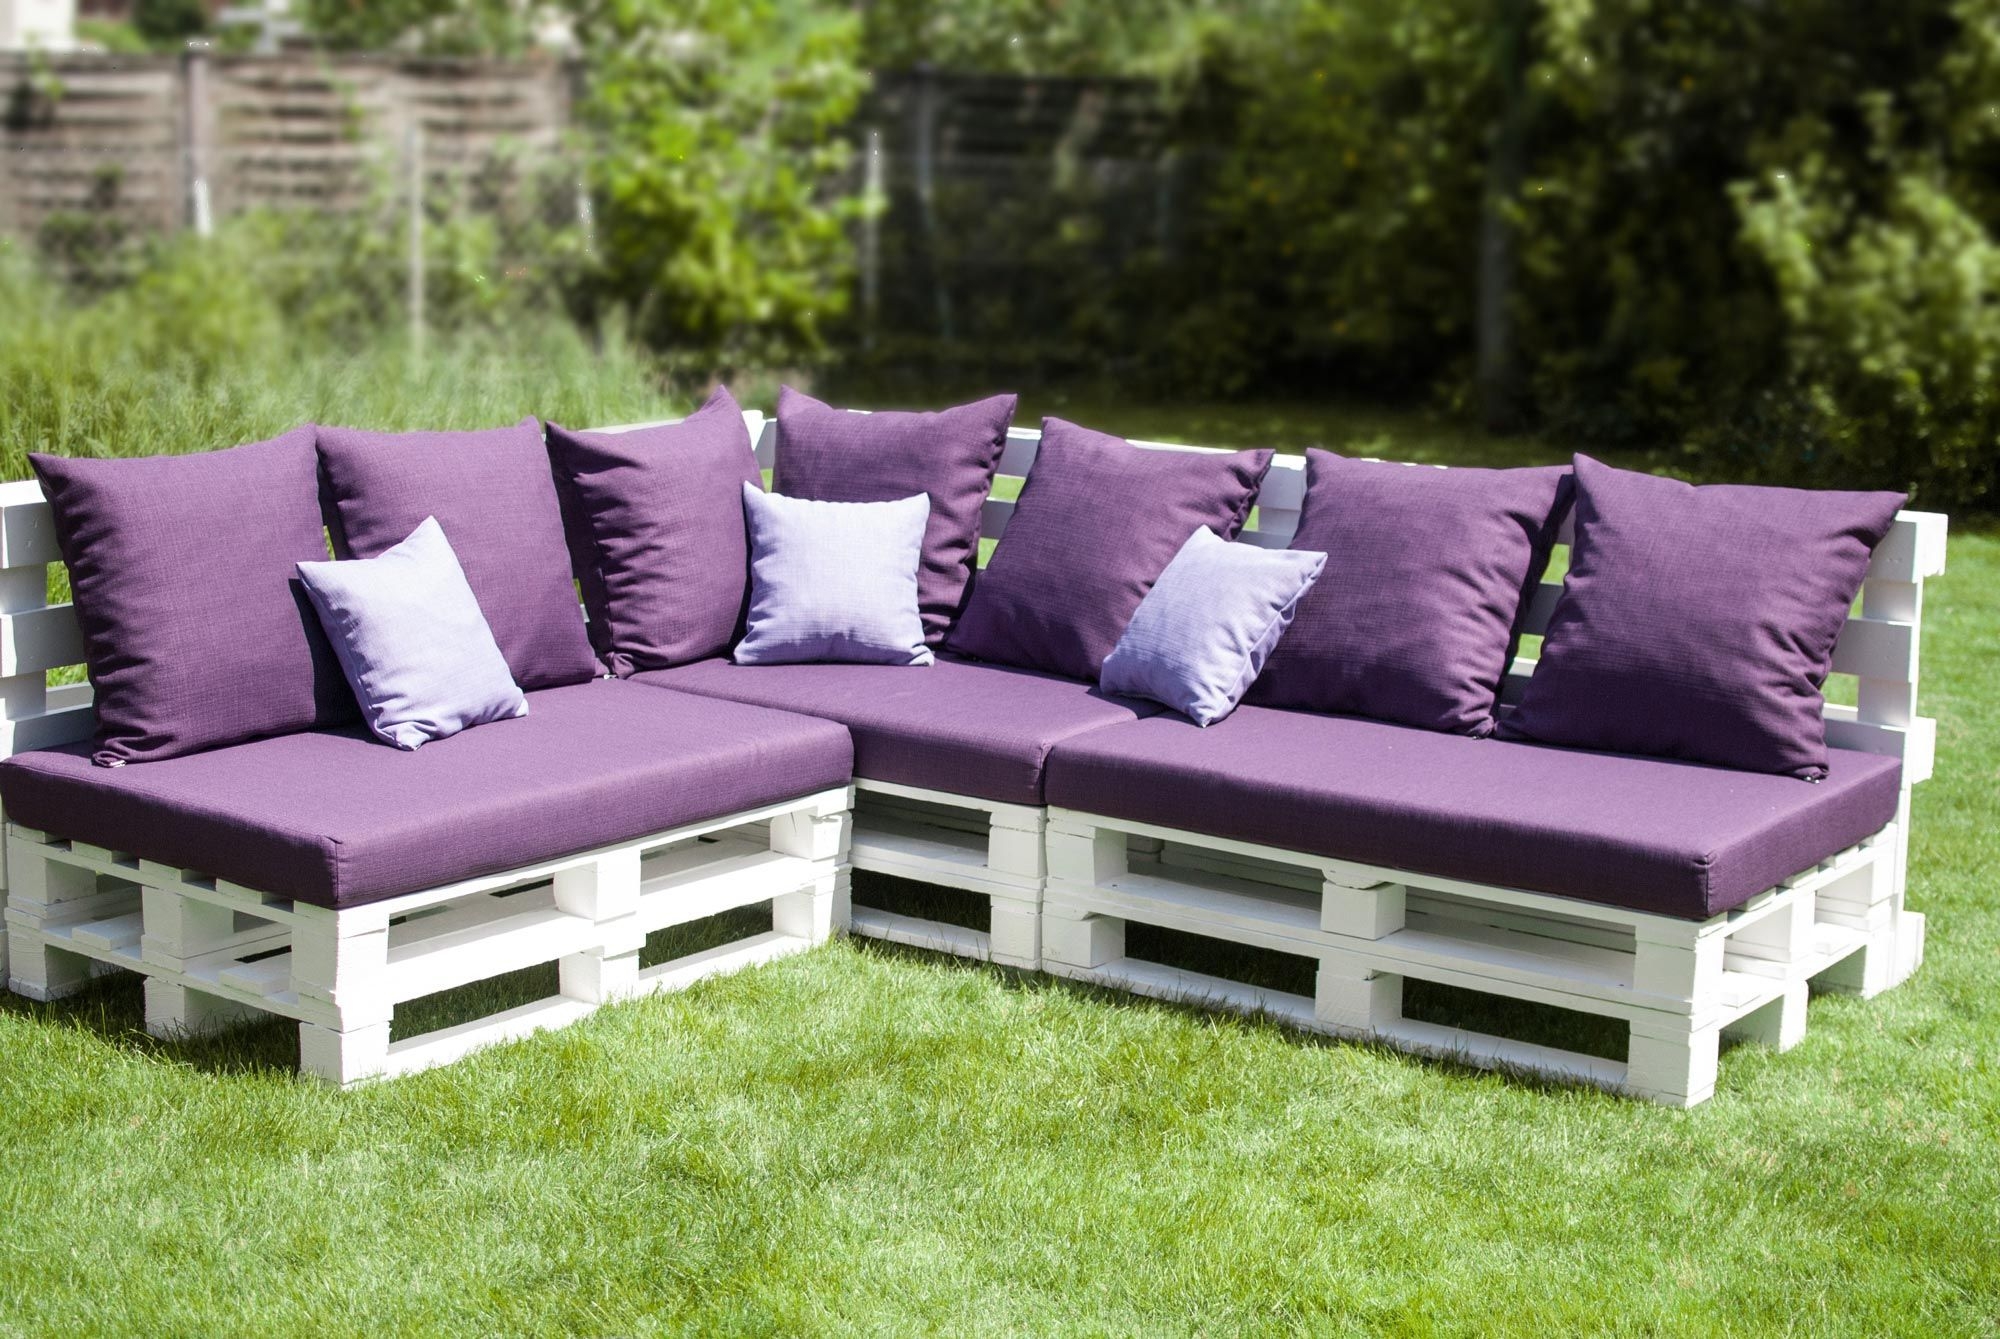 Set of 4 In Outdoor Lavender Purple Tufted Patio Chair Cushions Choose Size 